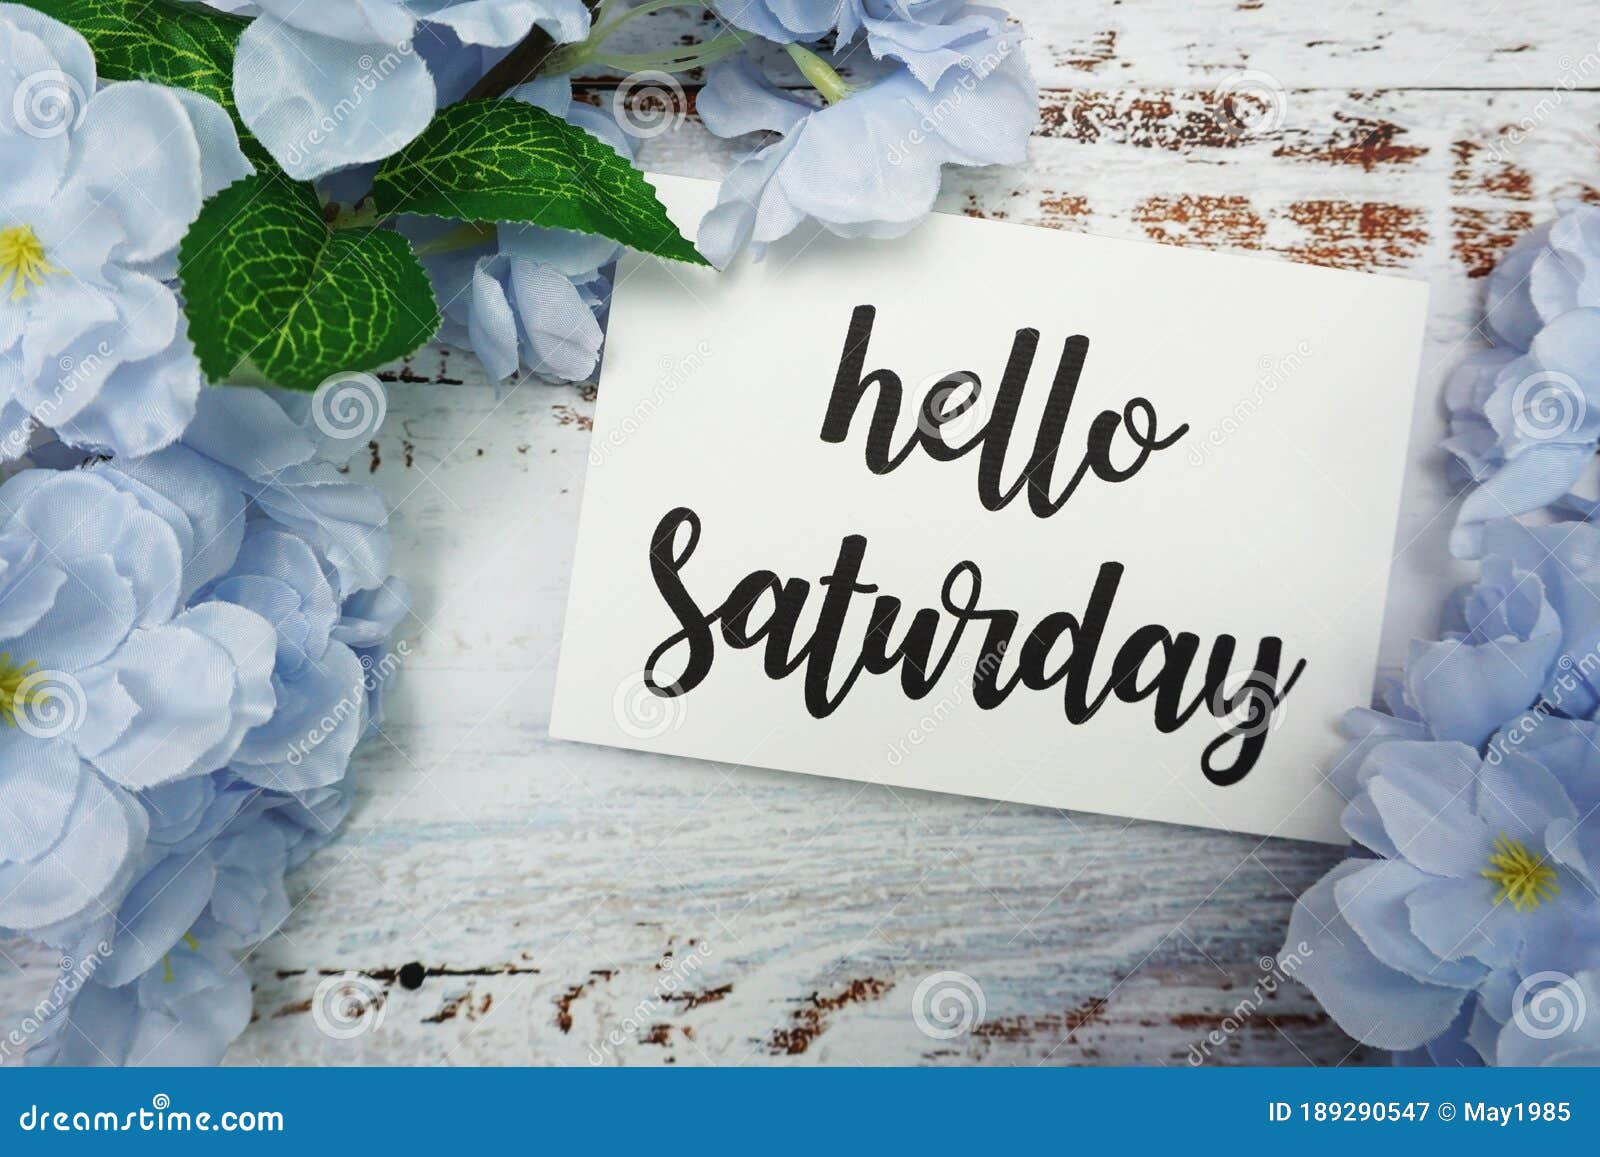 Hello Saturday Card With Blooming Flower On Wooden Background Stock